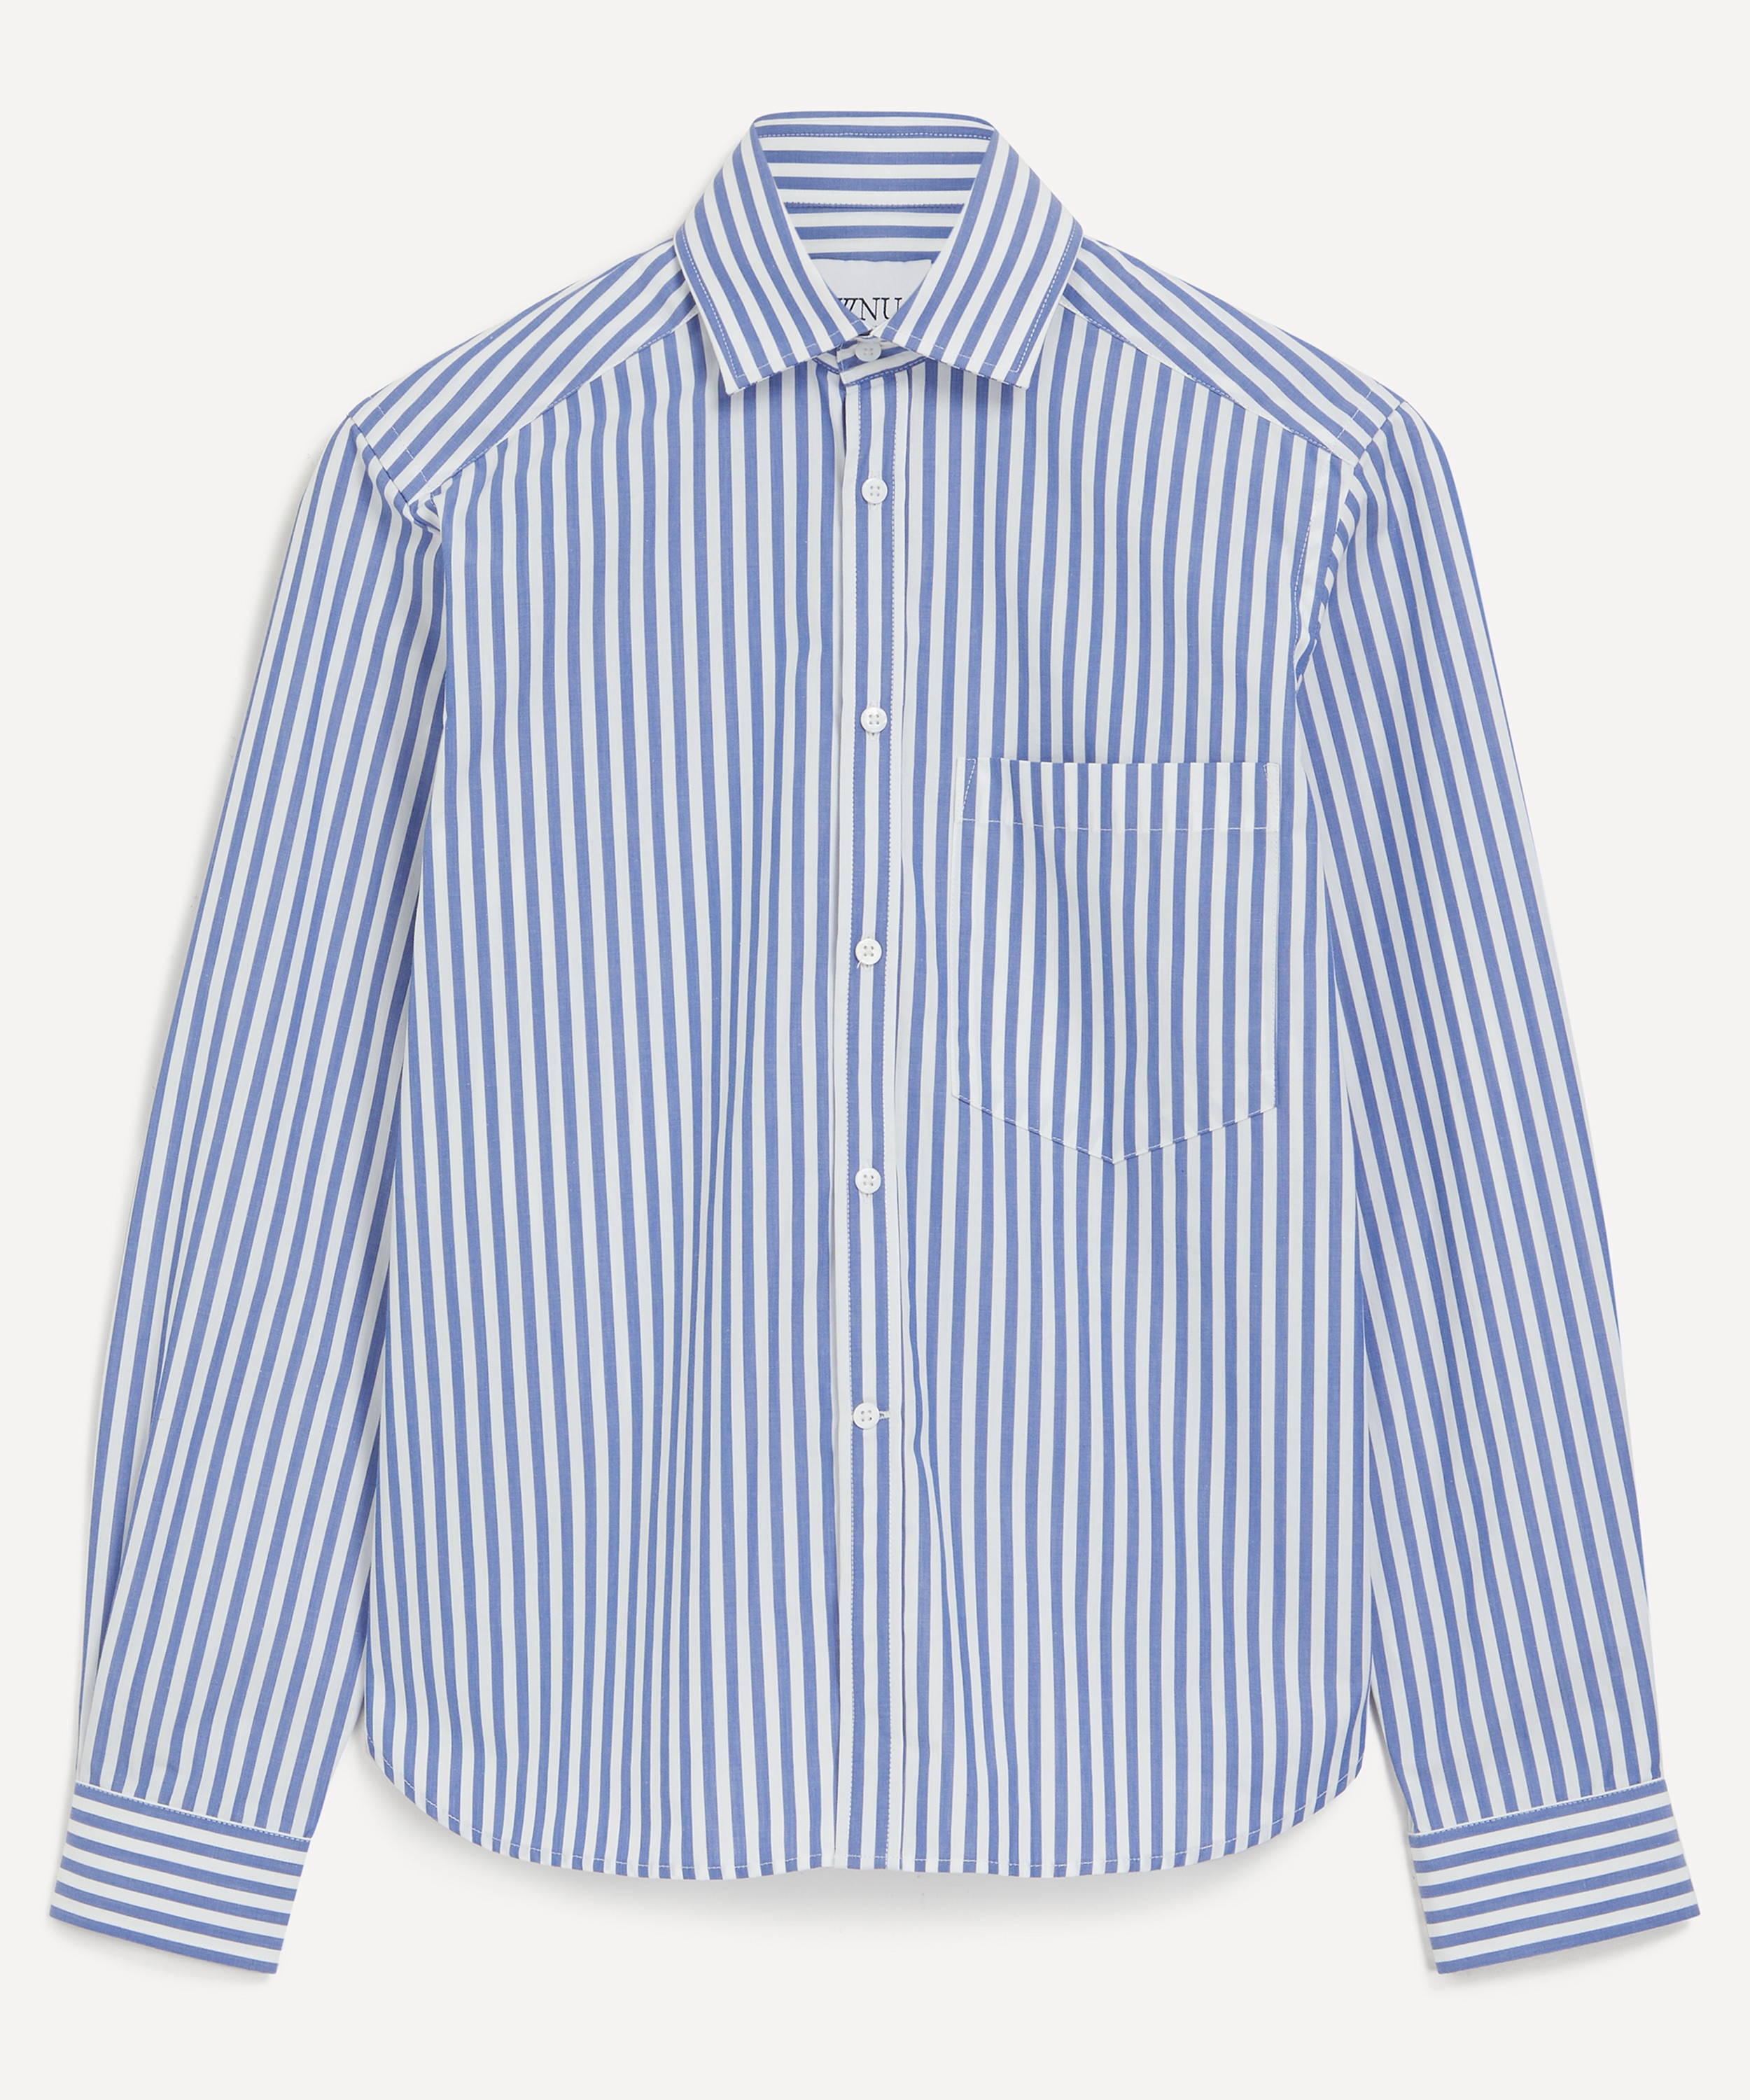 With Nothing Underneath The Classic Poplin Royal Blue Stripe Shirt ...